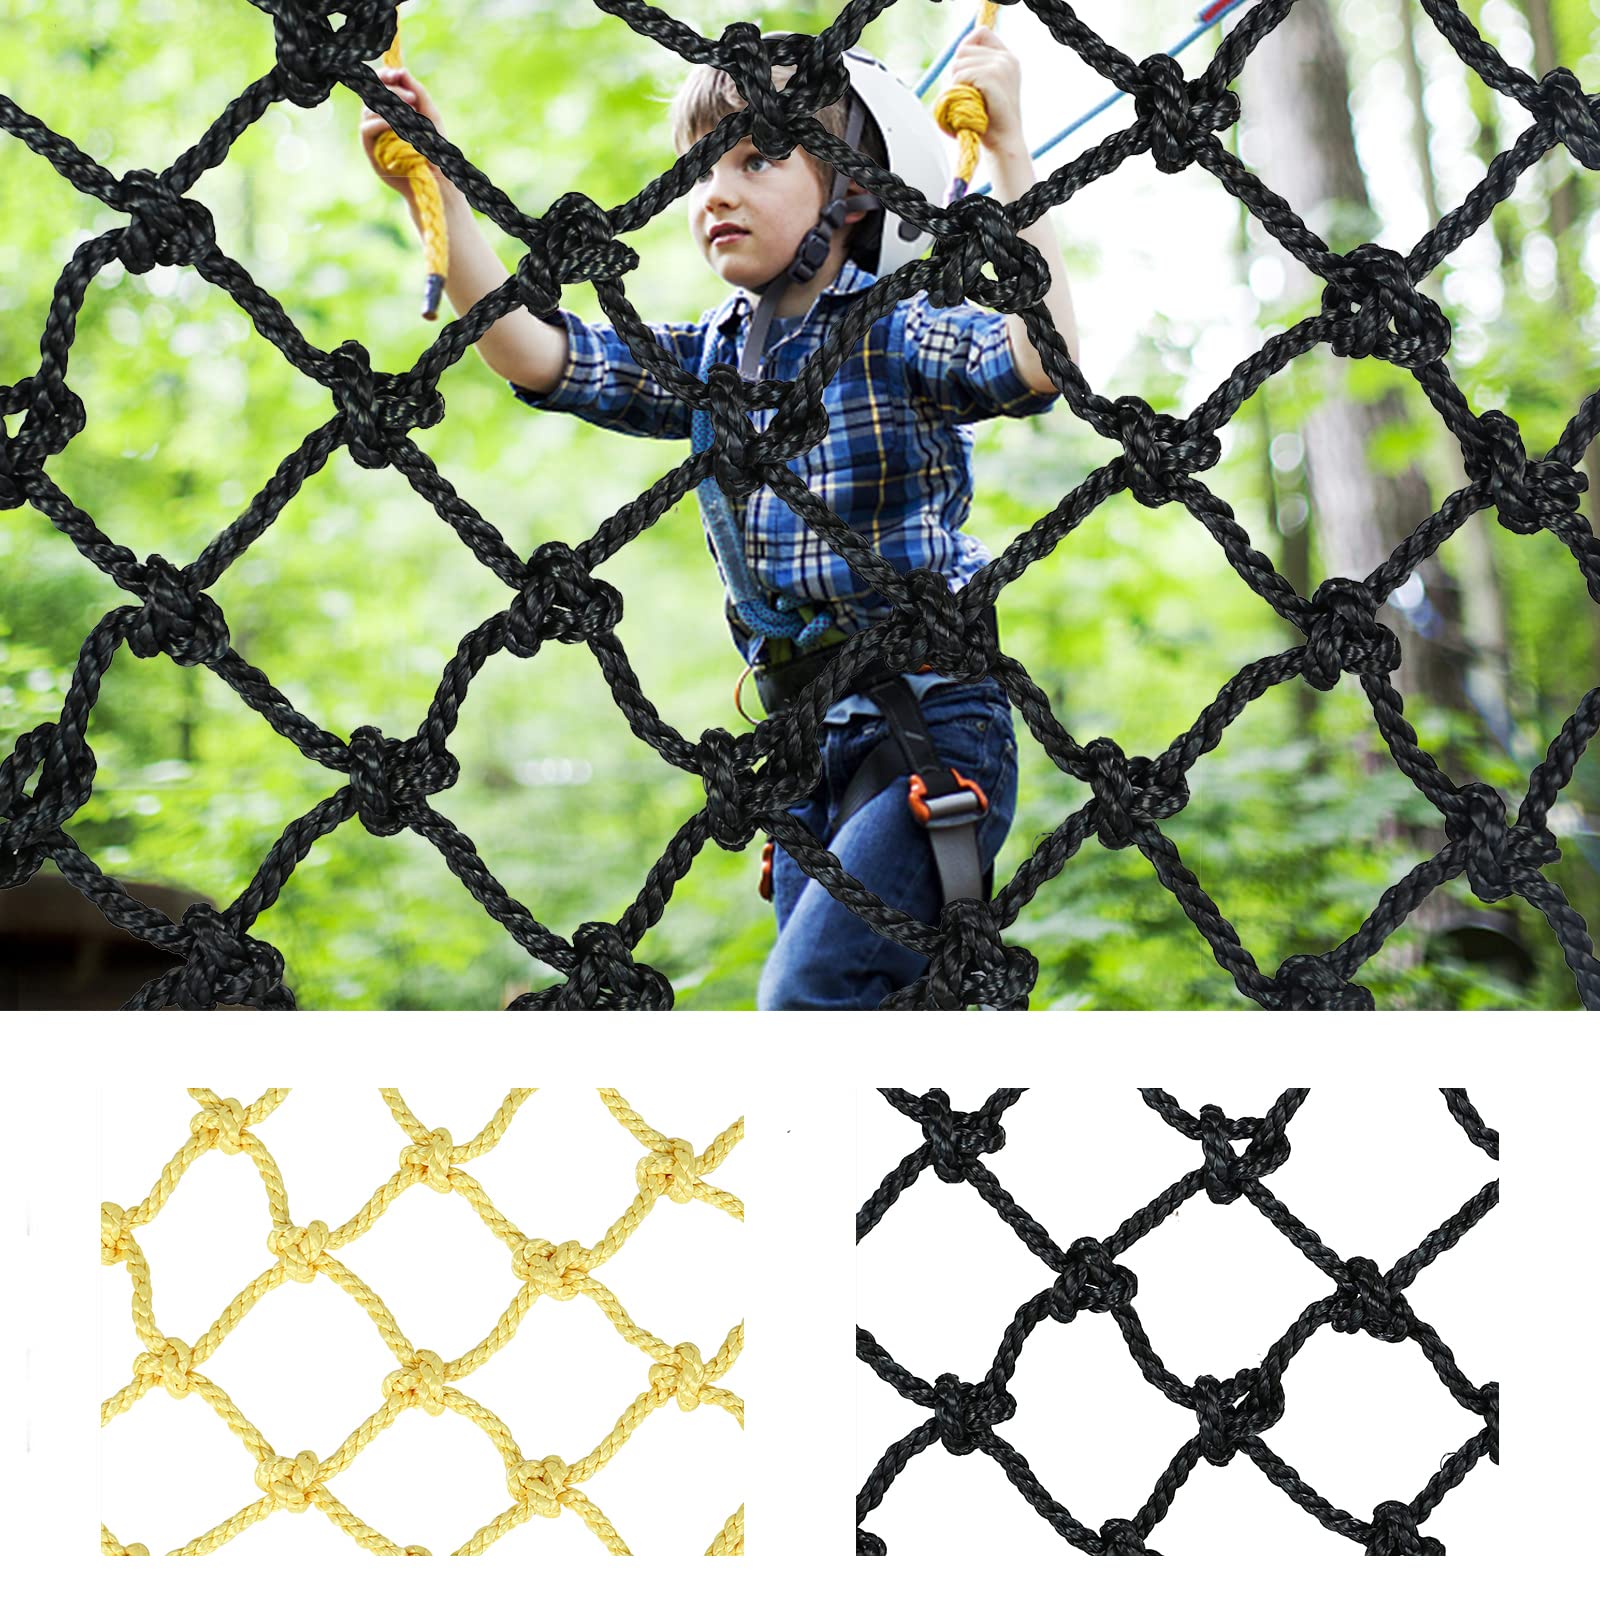 TWSOUL Playground Net, 3.3FT*6.6FT Climbing Cargo Net Rock Climbing Net Rope  Ladder for Kids and Adult Military Climbing, Net Indoor Outdoor Climbing,  Jungle Gyms, Treehouse, Obstacle Courses, Black